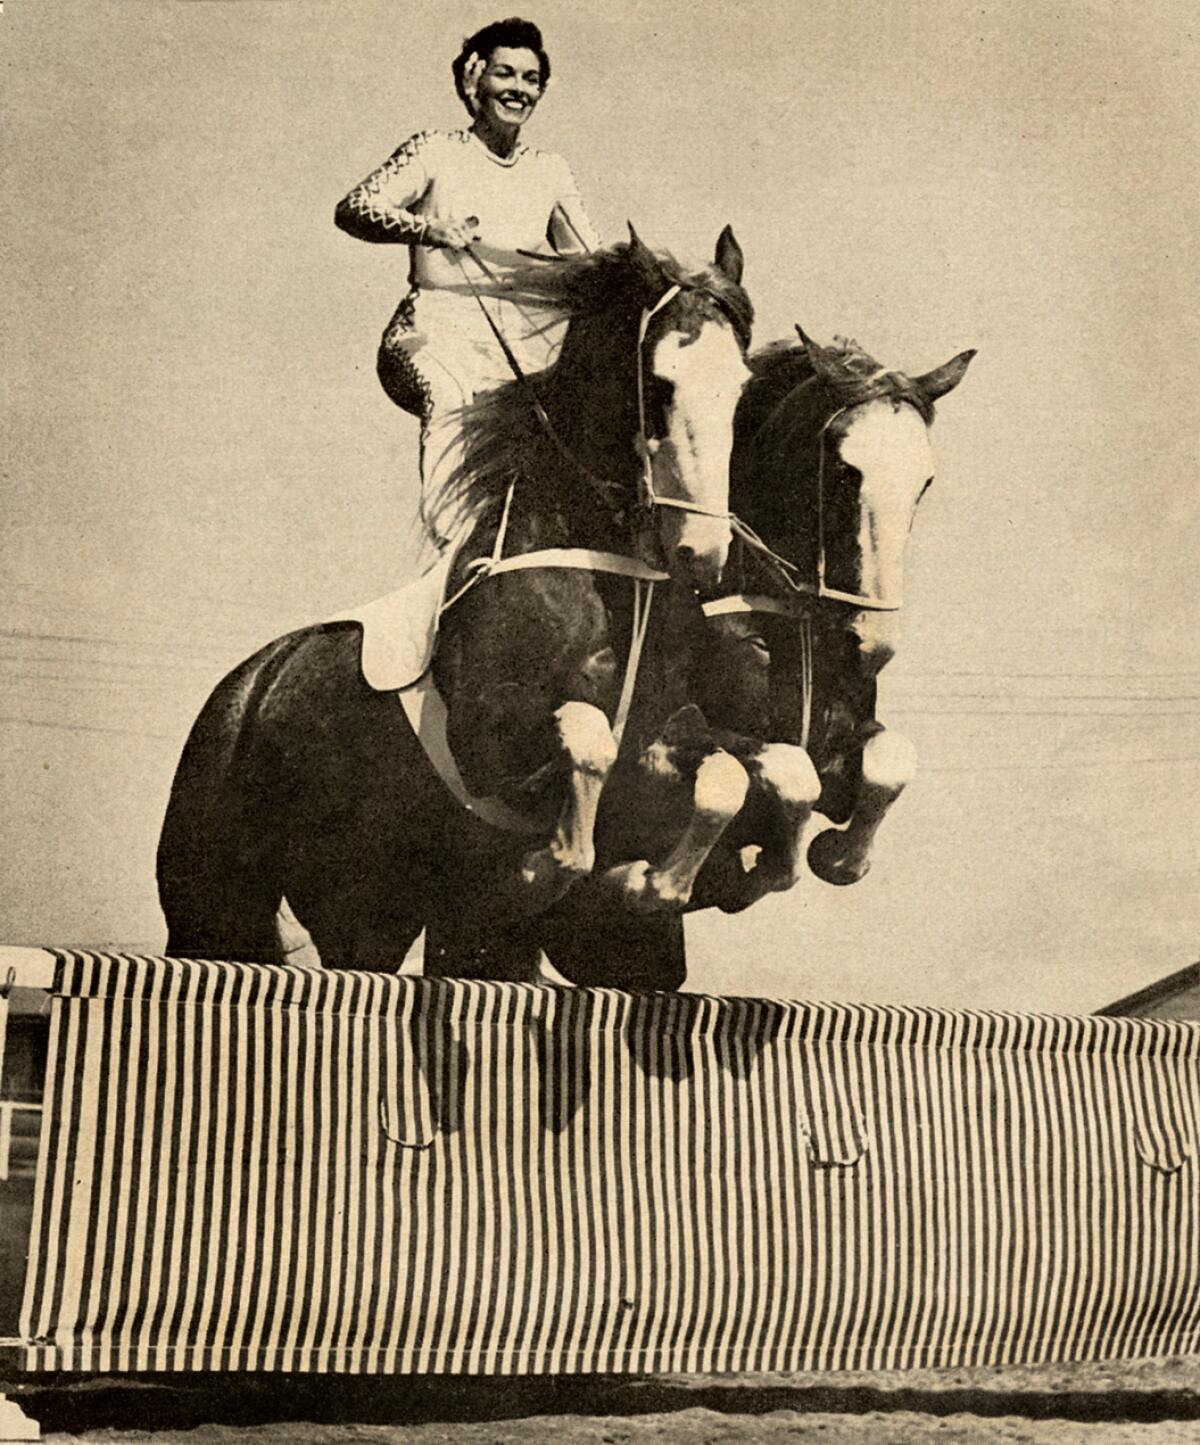 Pat Ommert and her steeds take a precision jump in preparation for the Roman Riding competition at the 1959 Flintridge Amateur Horse Show in La Cañada Flintridge.